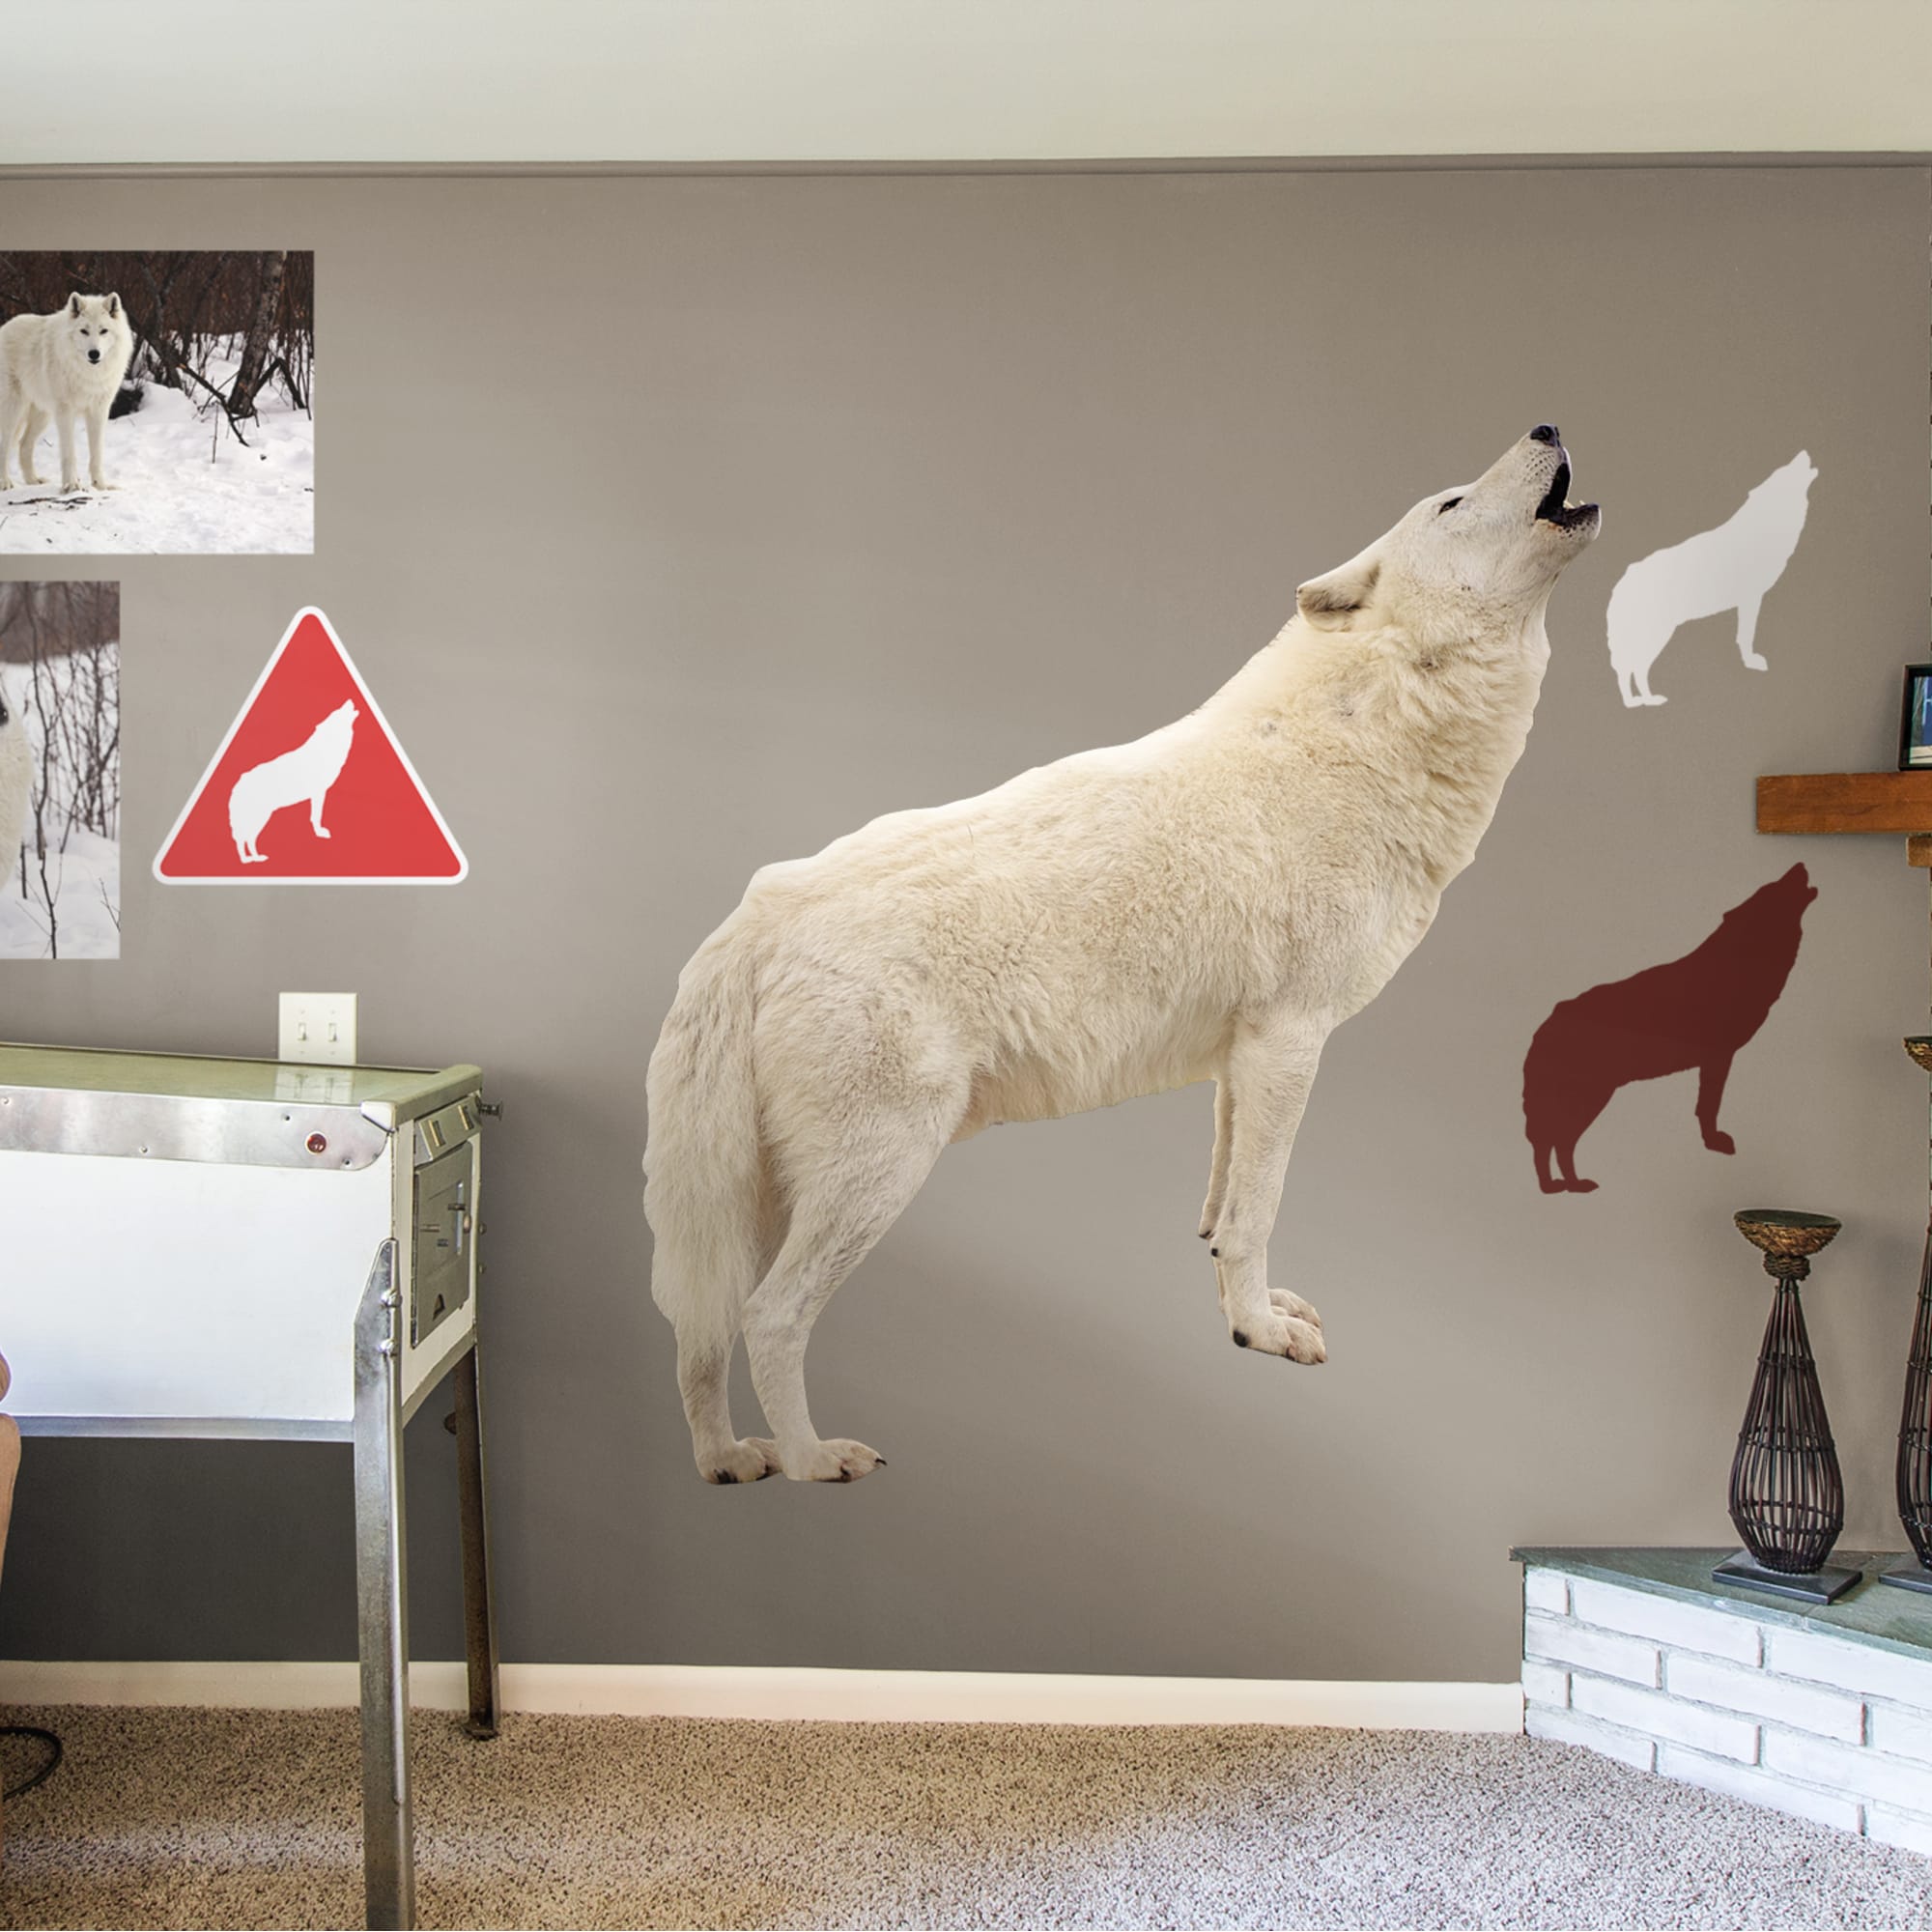 Howling Wolf - Removable Vinyl Decal Life-Size Animal + 5 Decals (53"W x 68"H) by Fathead